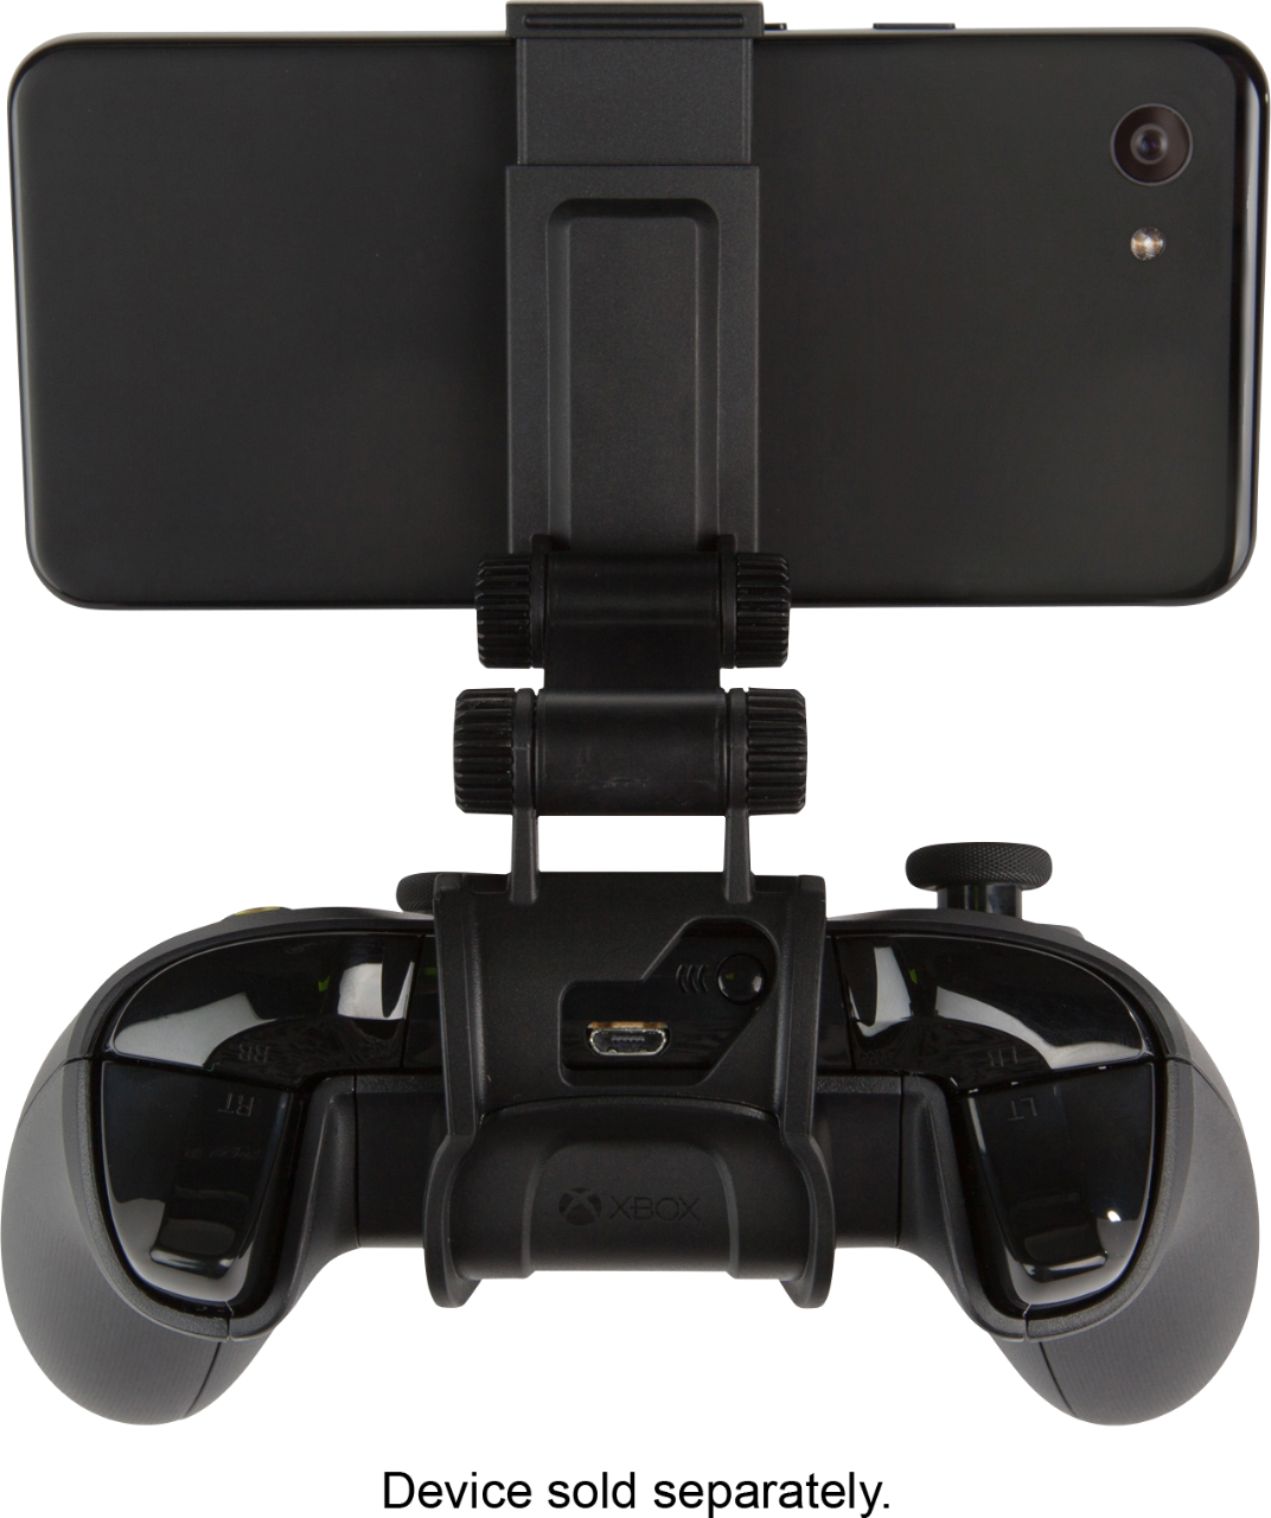 moga mobile gaming clip for xbox wireless controllers